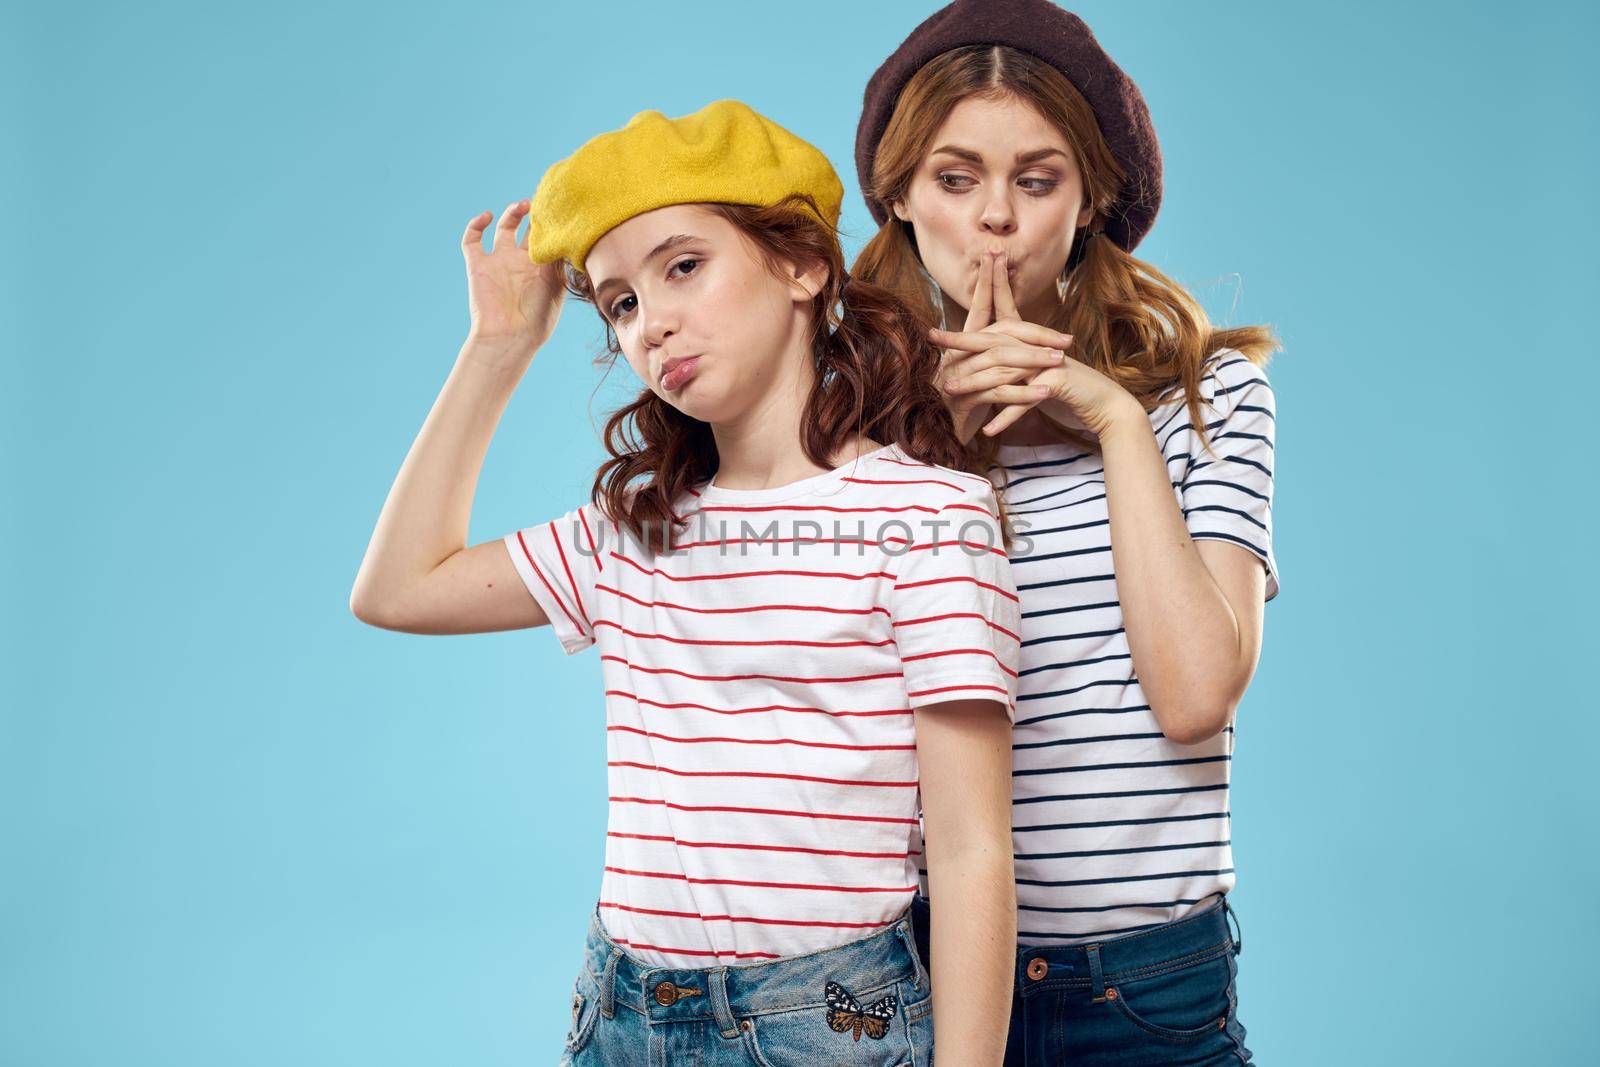 Fashion sisters in hats fun lifestyle blue background studio. High quality photo